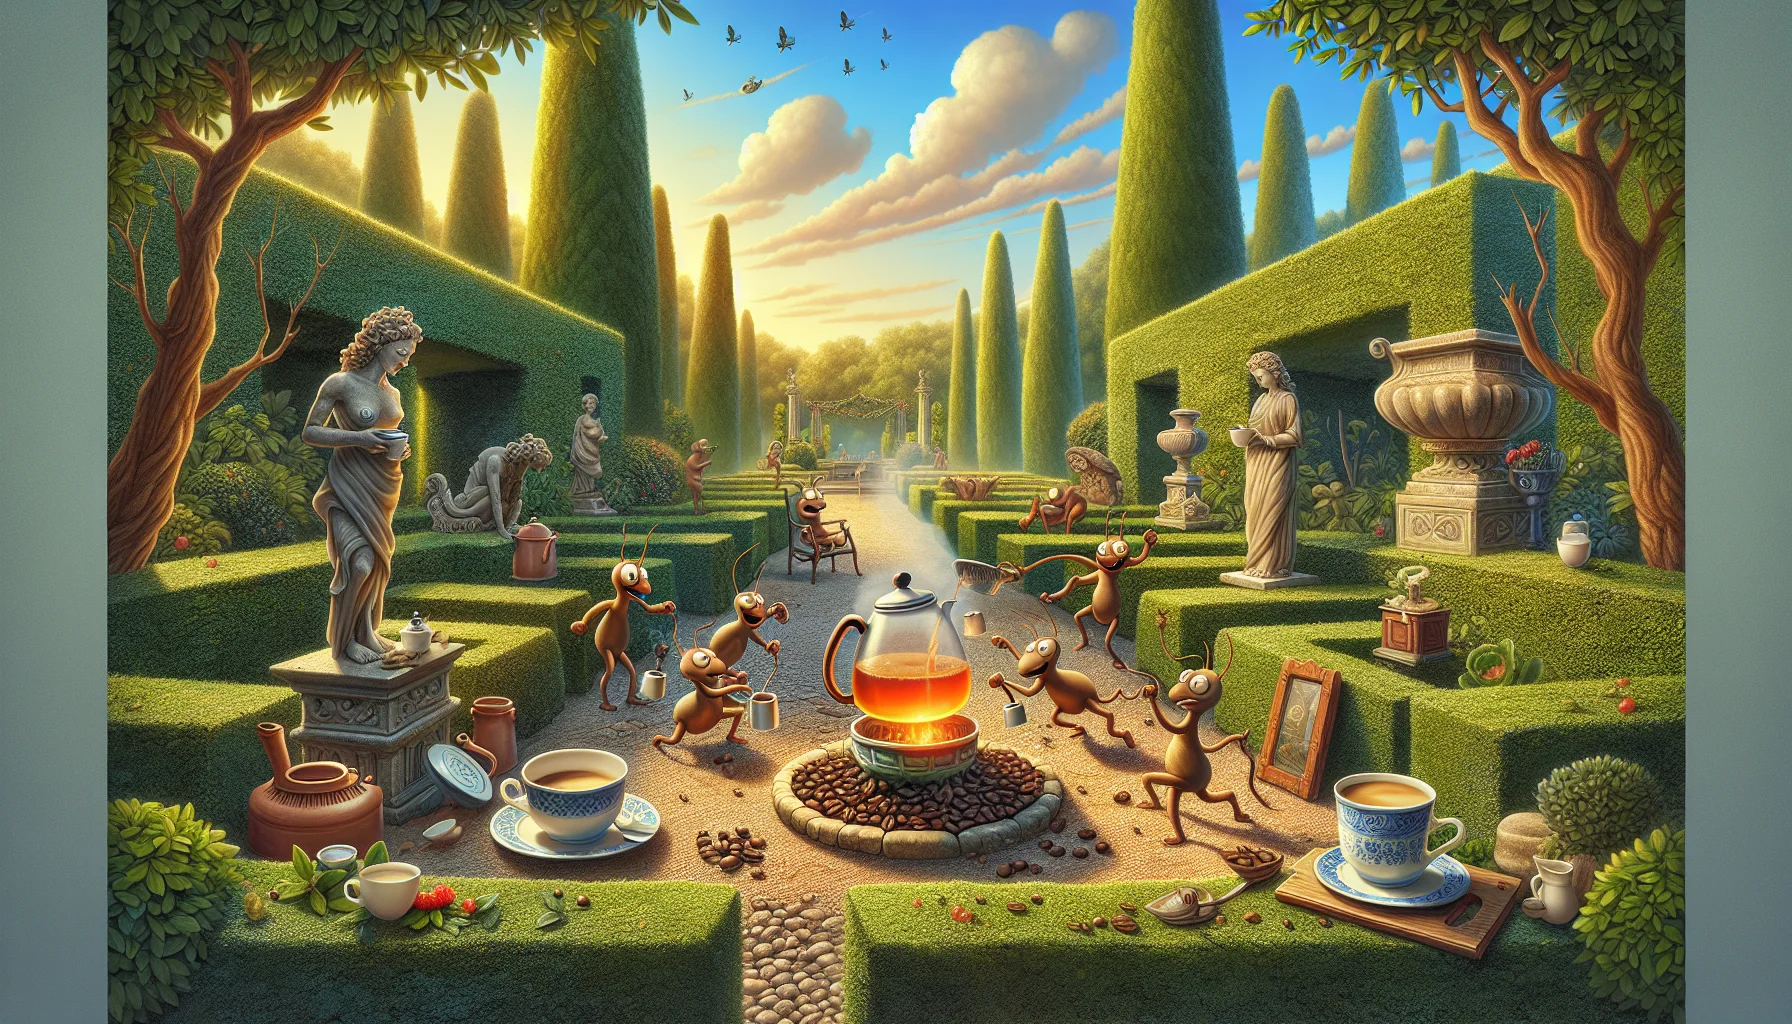 Create a lively and humorous depiction of a classic Tuscan garden, commonly known as 'Bianco Latte Giardini di Toscana'. The garden is bathed in the soft light of a sunny afternoon. Stone sculptures and manicured hedges lend the scene an air of tranquillity, while a whimsical situation unfolds. A group of animated tea leaves and coffee beans are partaking in a friendly brewing competition. Their amusing antics include a coffee bean trying to brew itself and a tea leaf attempting to stir a steaming kettle. Nearby, a welcoming arrangement of tea and coffee products beckons the viewer - exquisite tea cups, coffee mugs and fresh pastries.